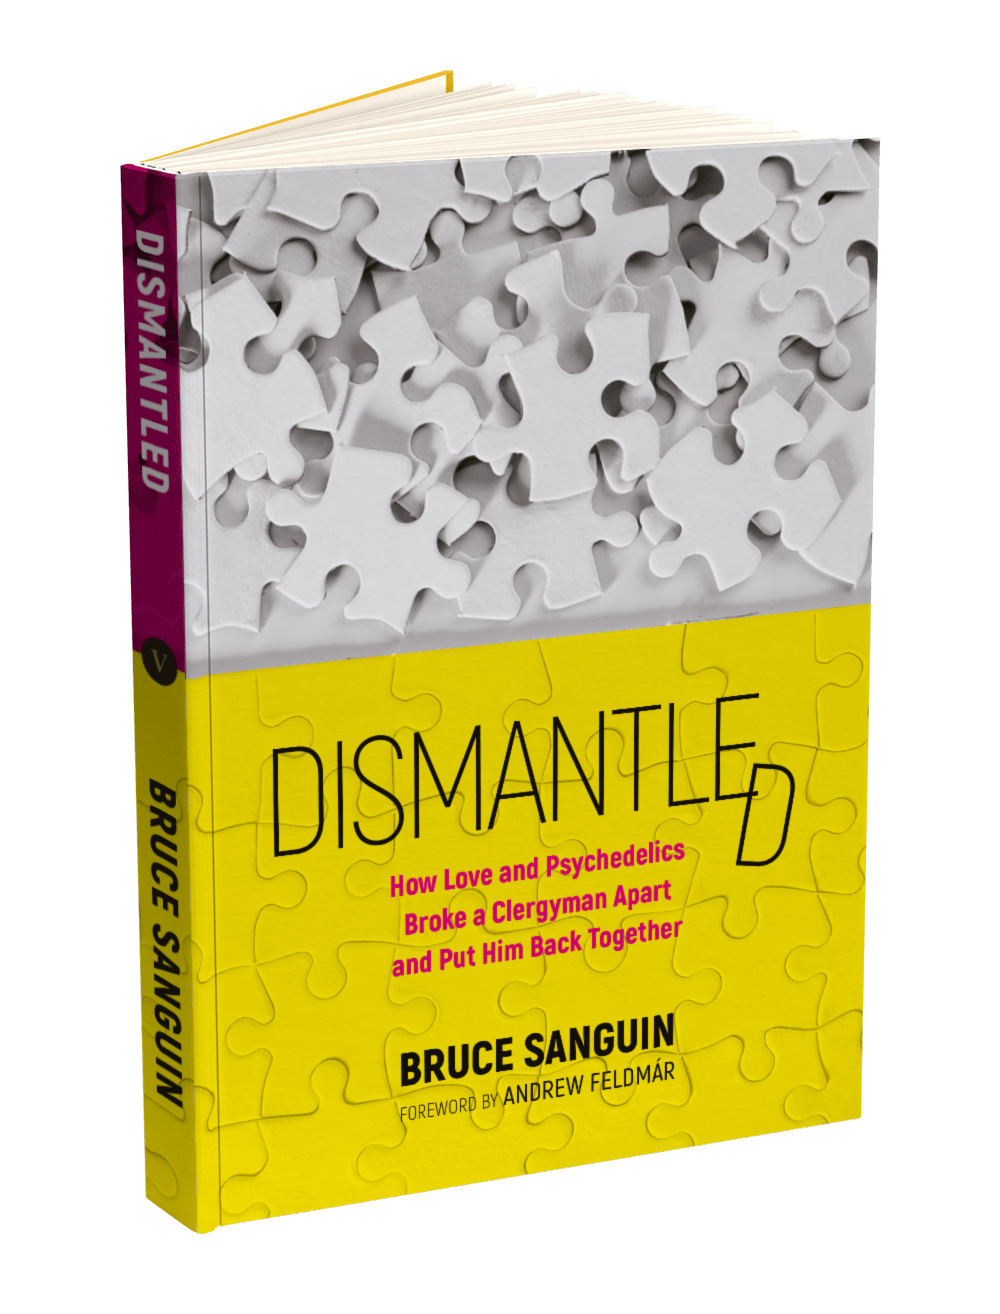 Dismanteled by Bruce Sanguin